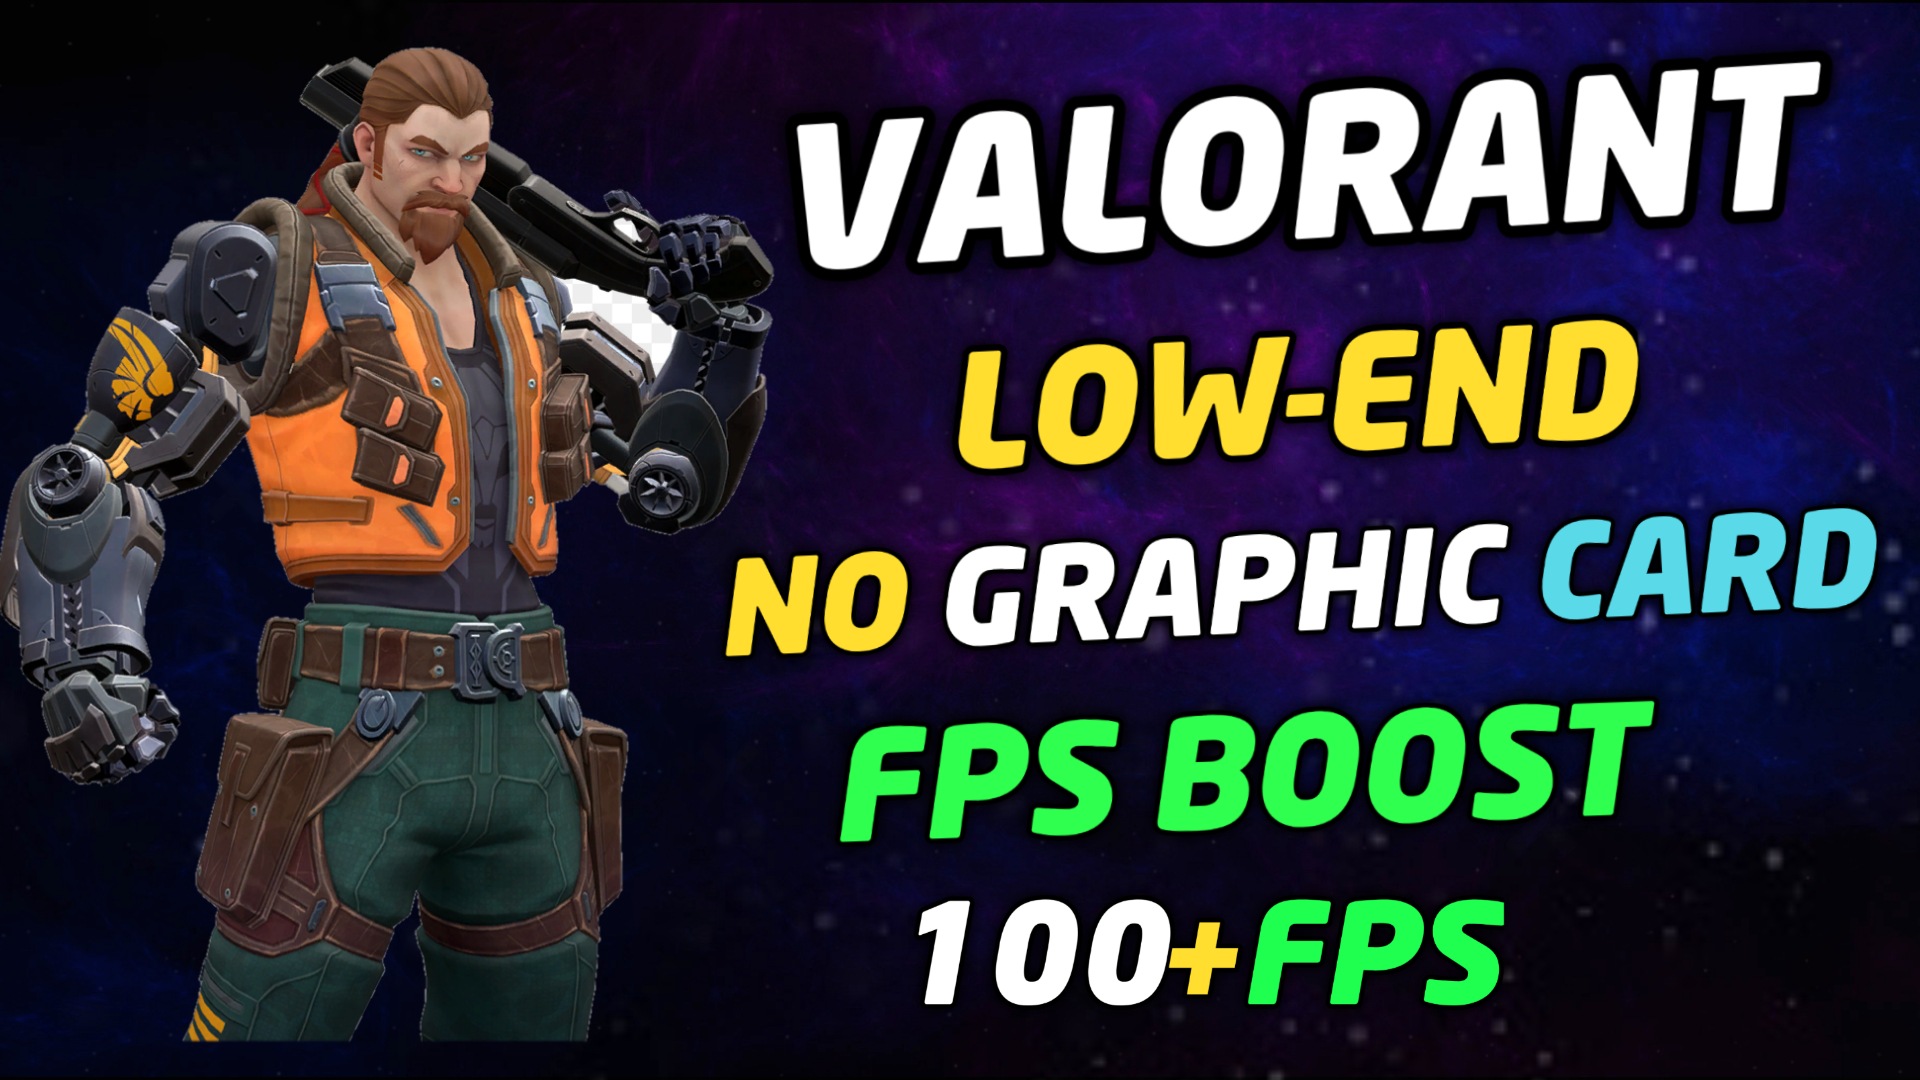 DOWNLOAD VALORANT FOR PC HIGHLY COMPRESSED IN 500MB » Technology Platform